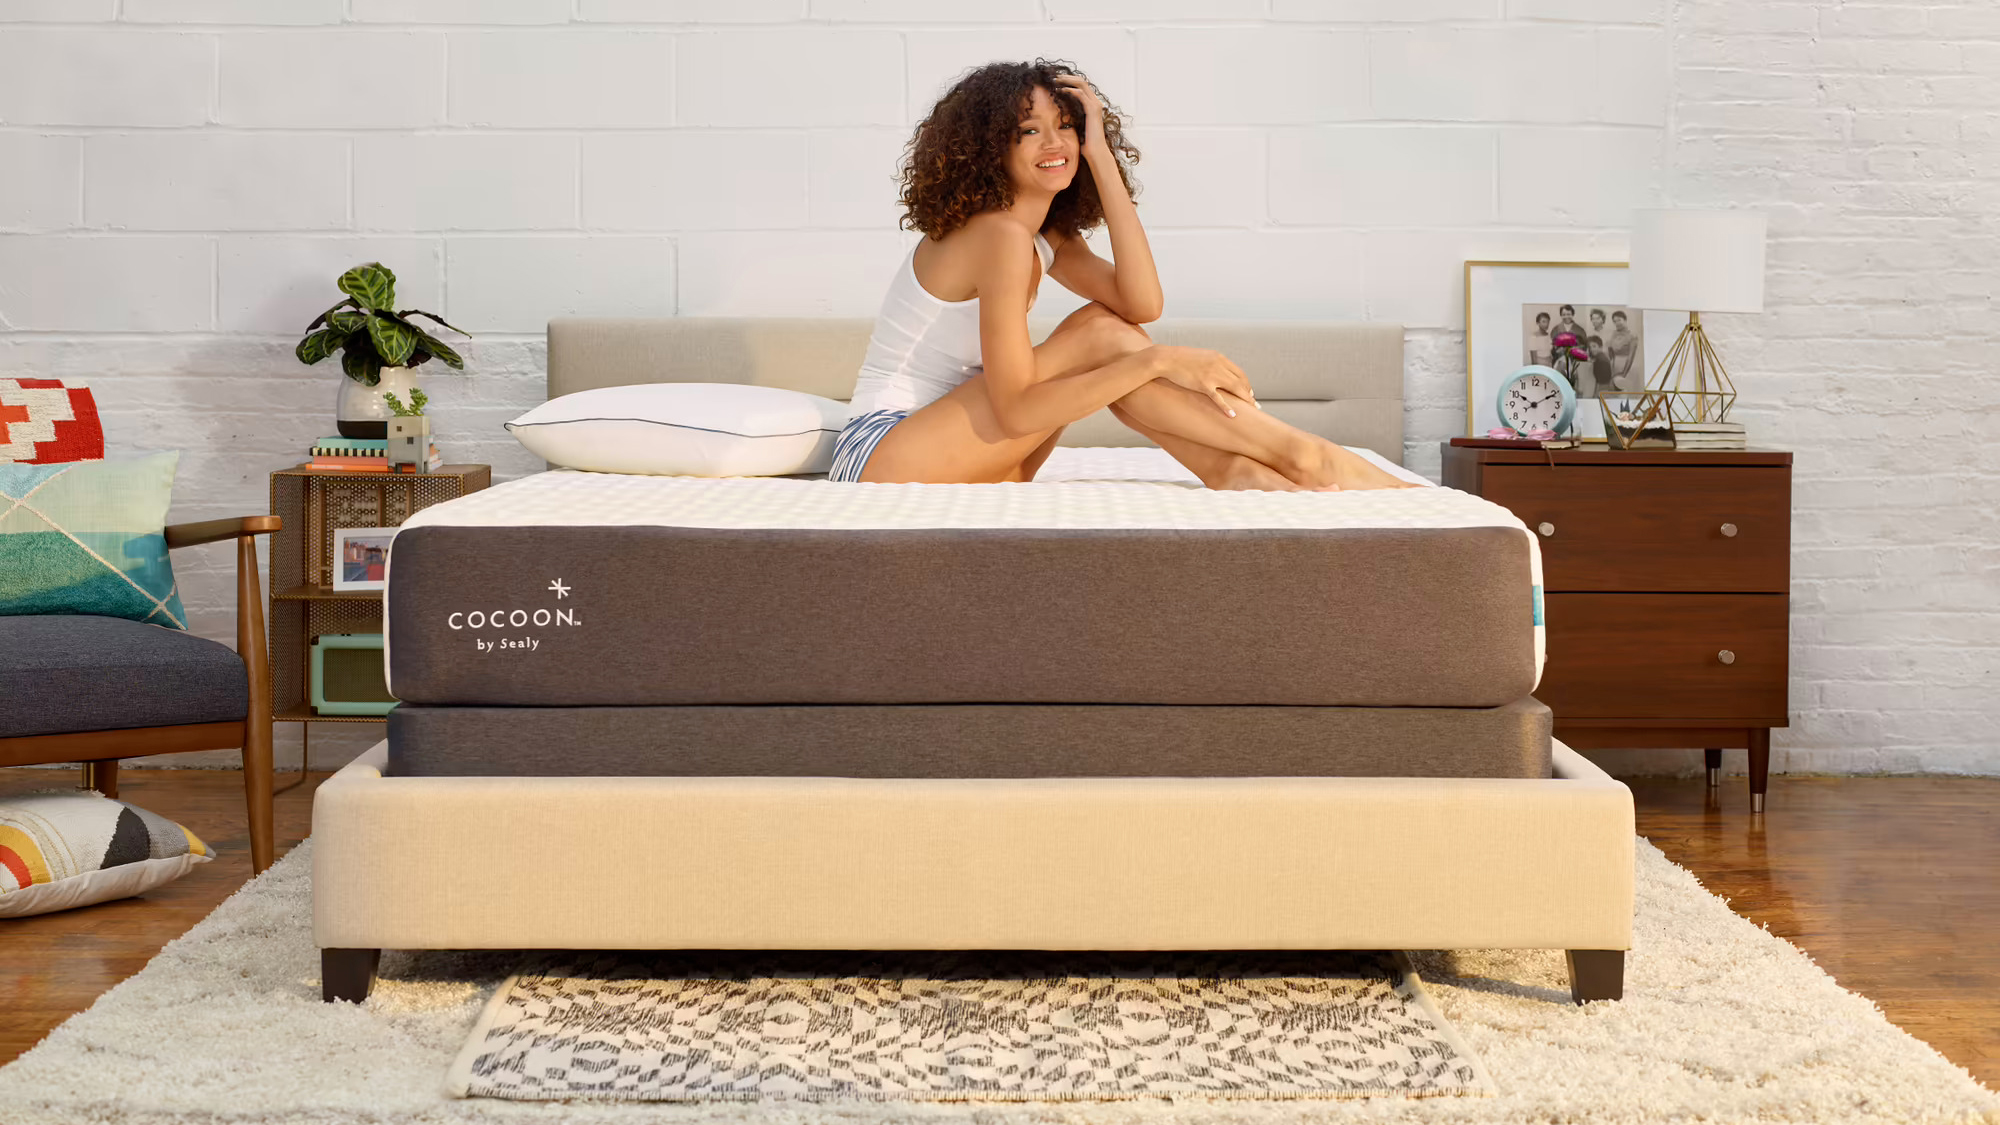 best mattress: A woman with dark curly hair sits on the Cocoon by Sealy Chill